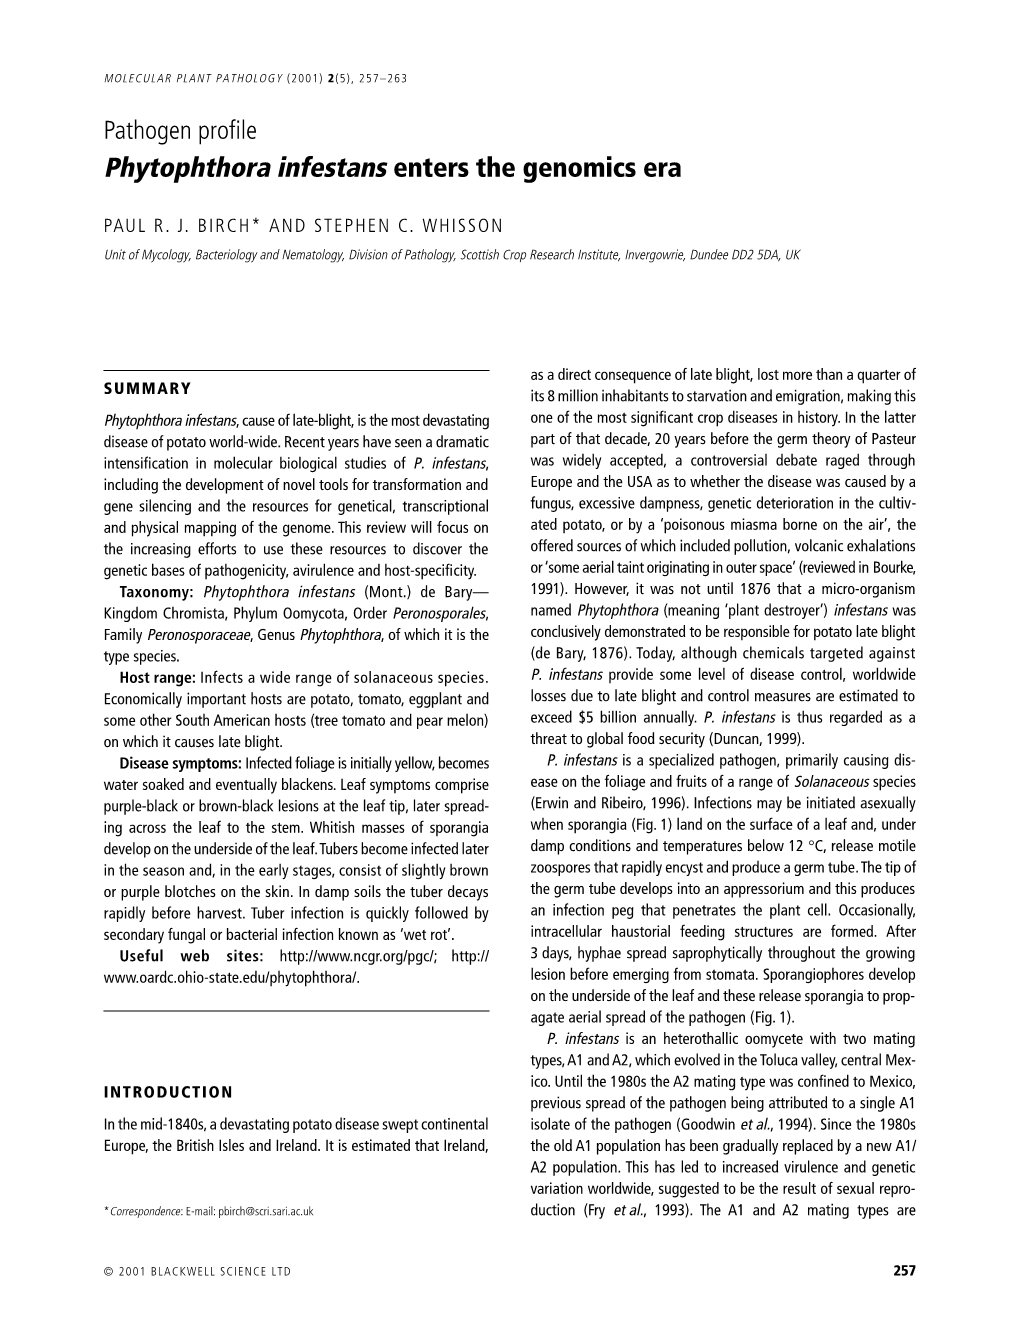 Phytophthora Infestans Enters the Genomics Era